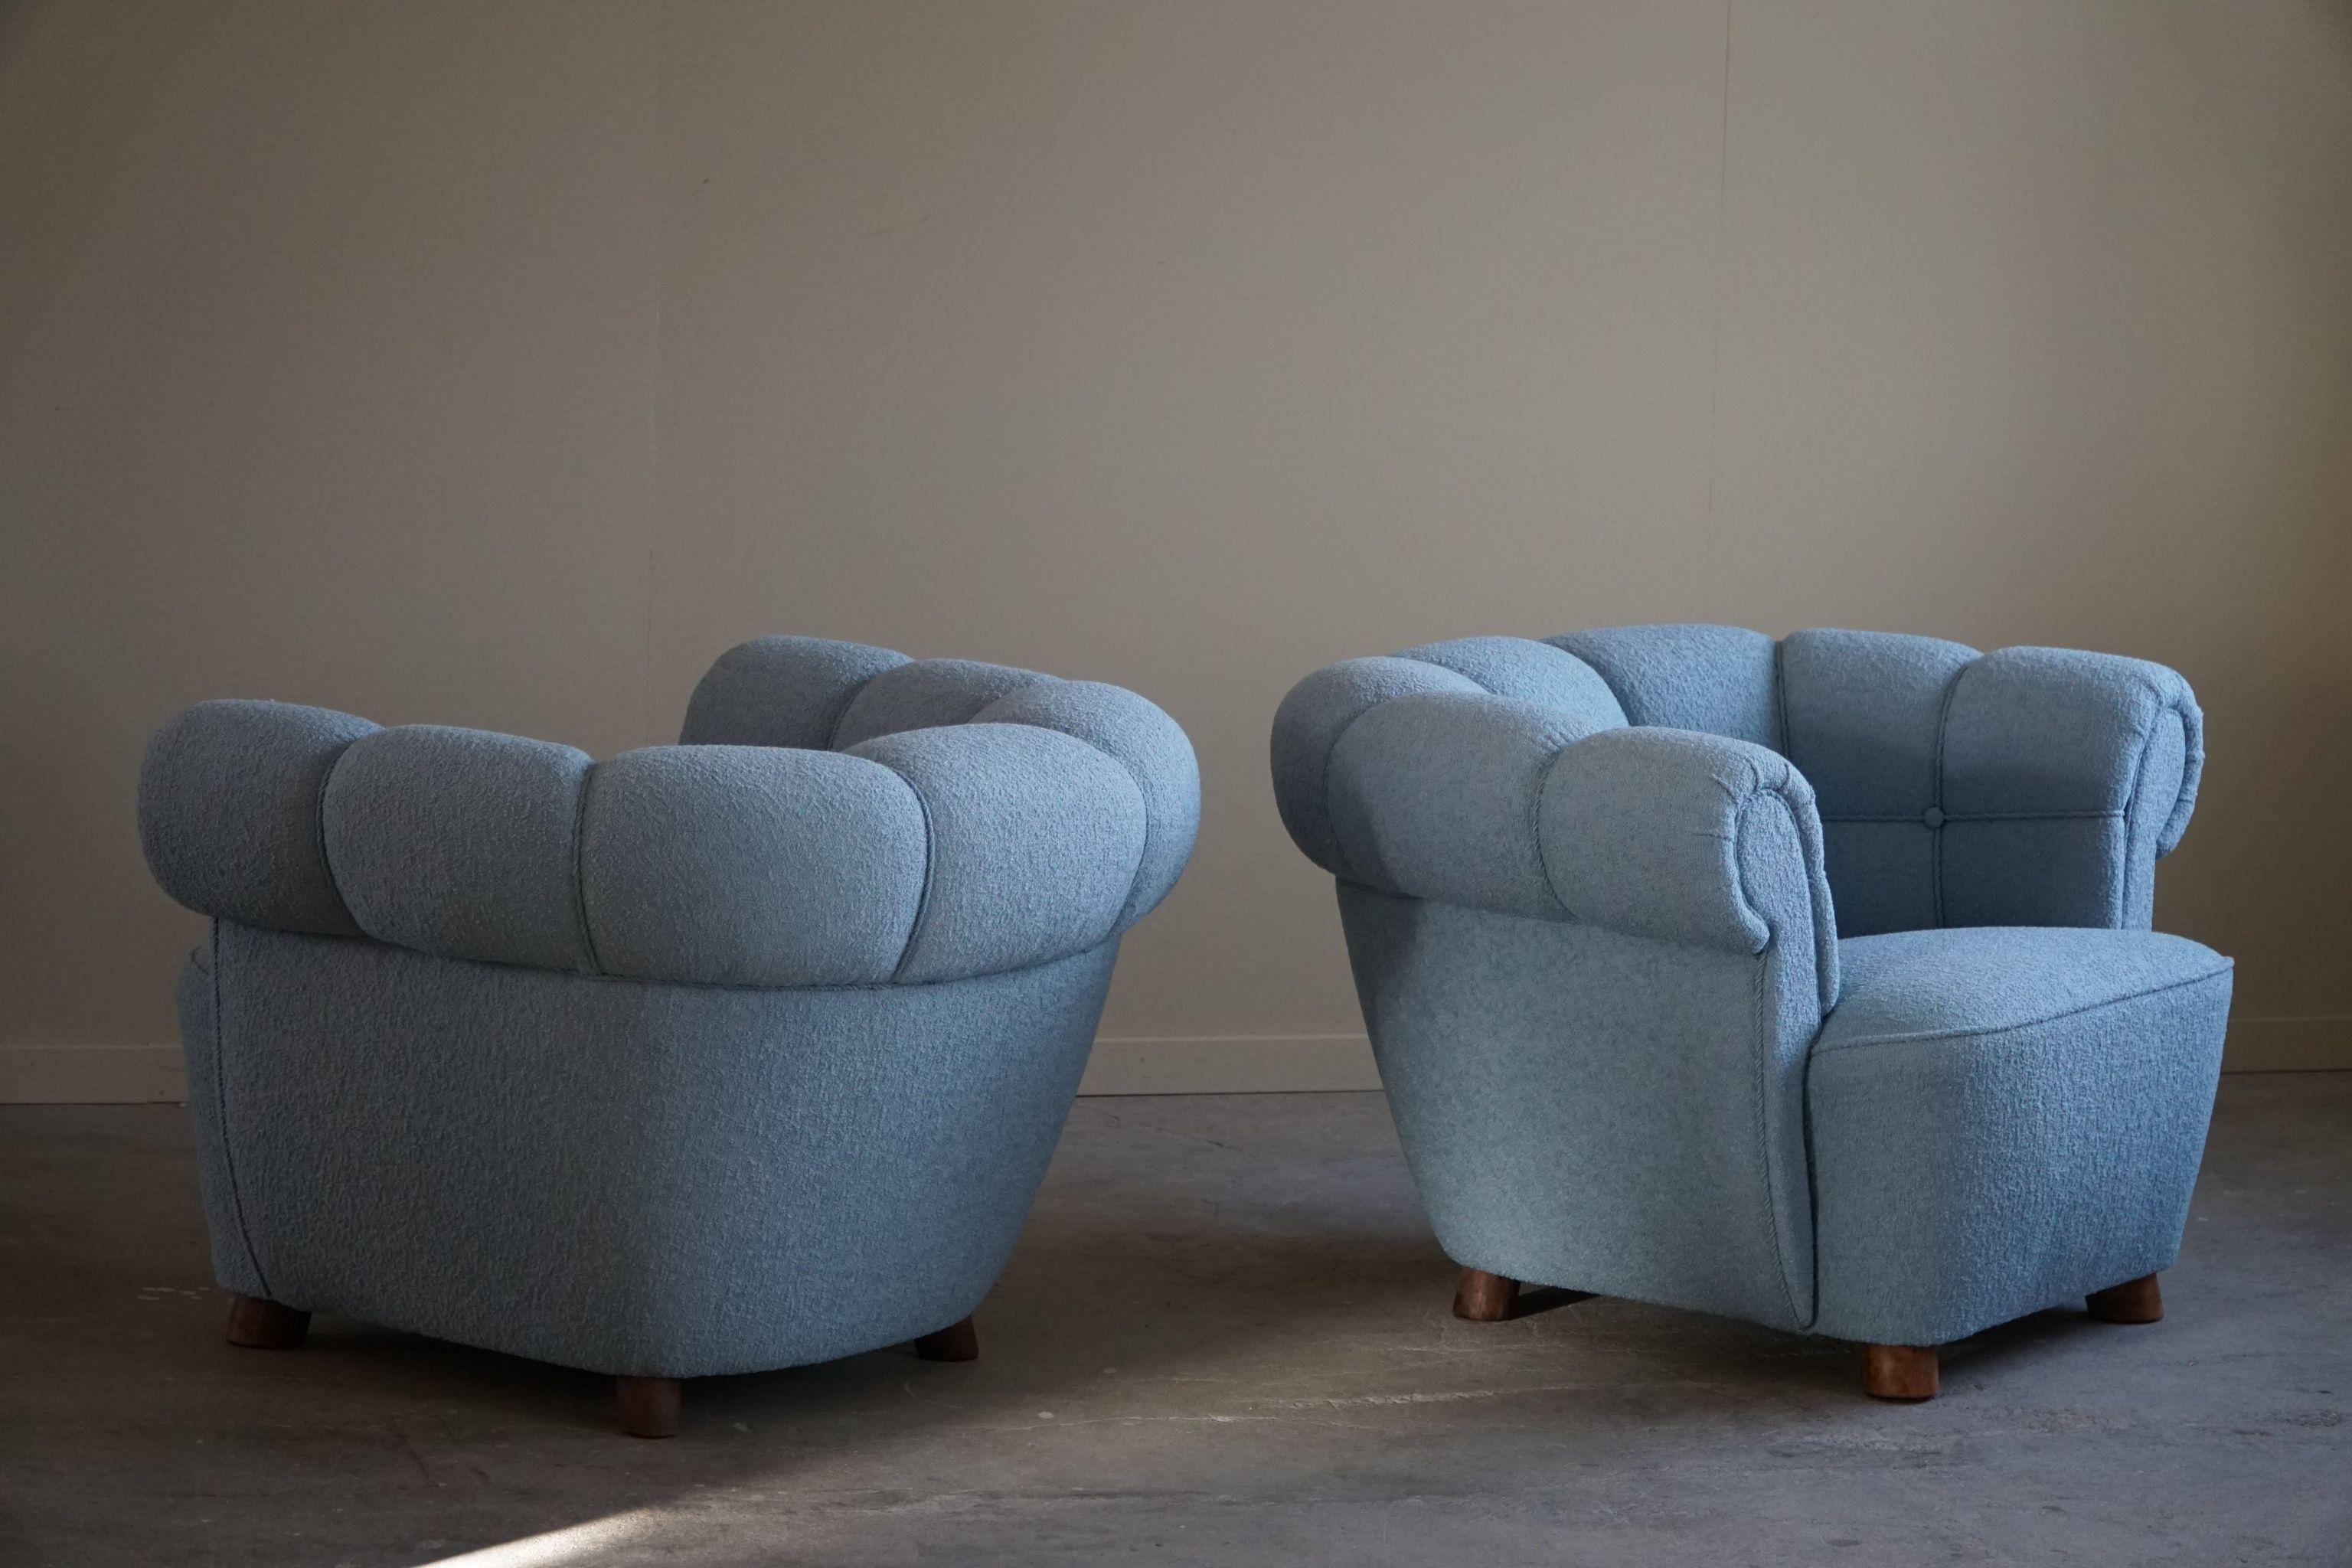 1930s Pair of Lounge Chairs, Reupholstered in Bouclé, Art Deco, Danish Modern For Sale 12